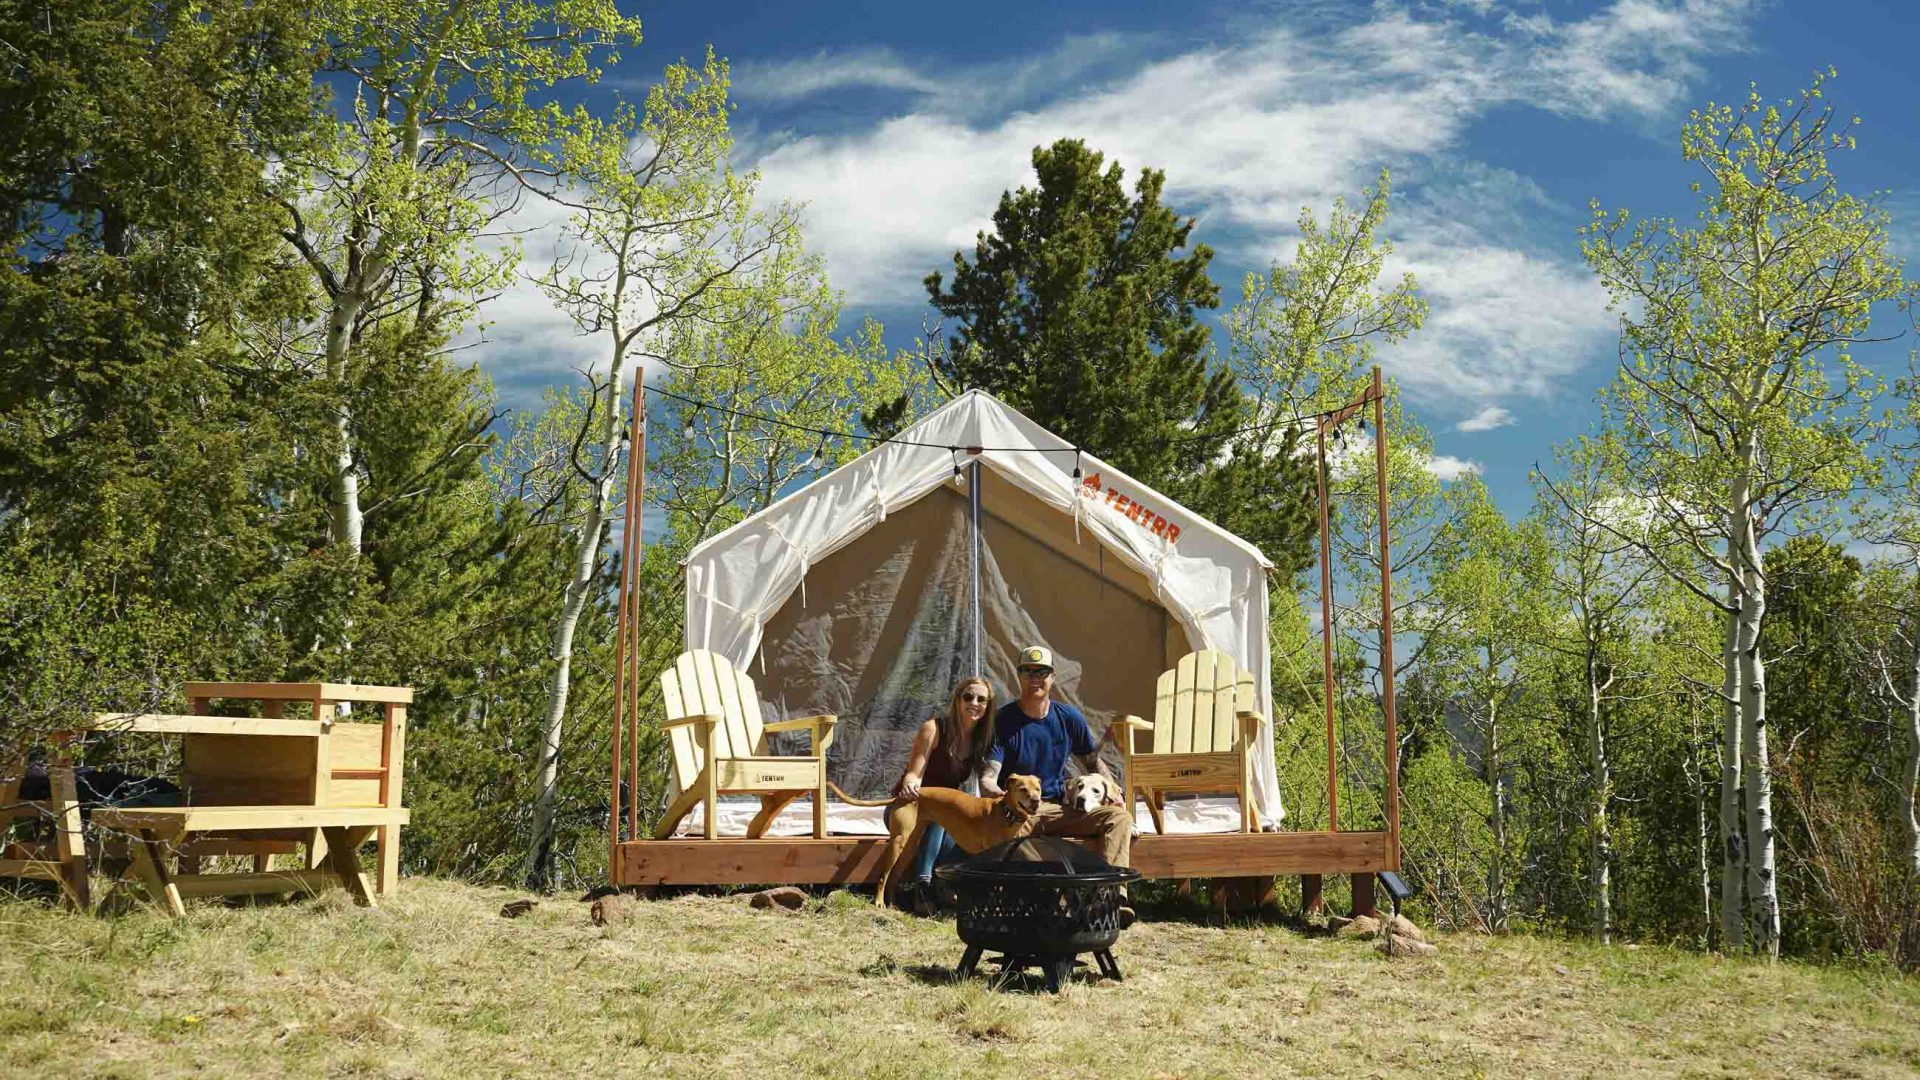 A man and a woman sit together on the porch of a tent which is surrounded by trees.